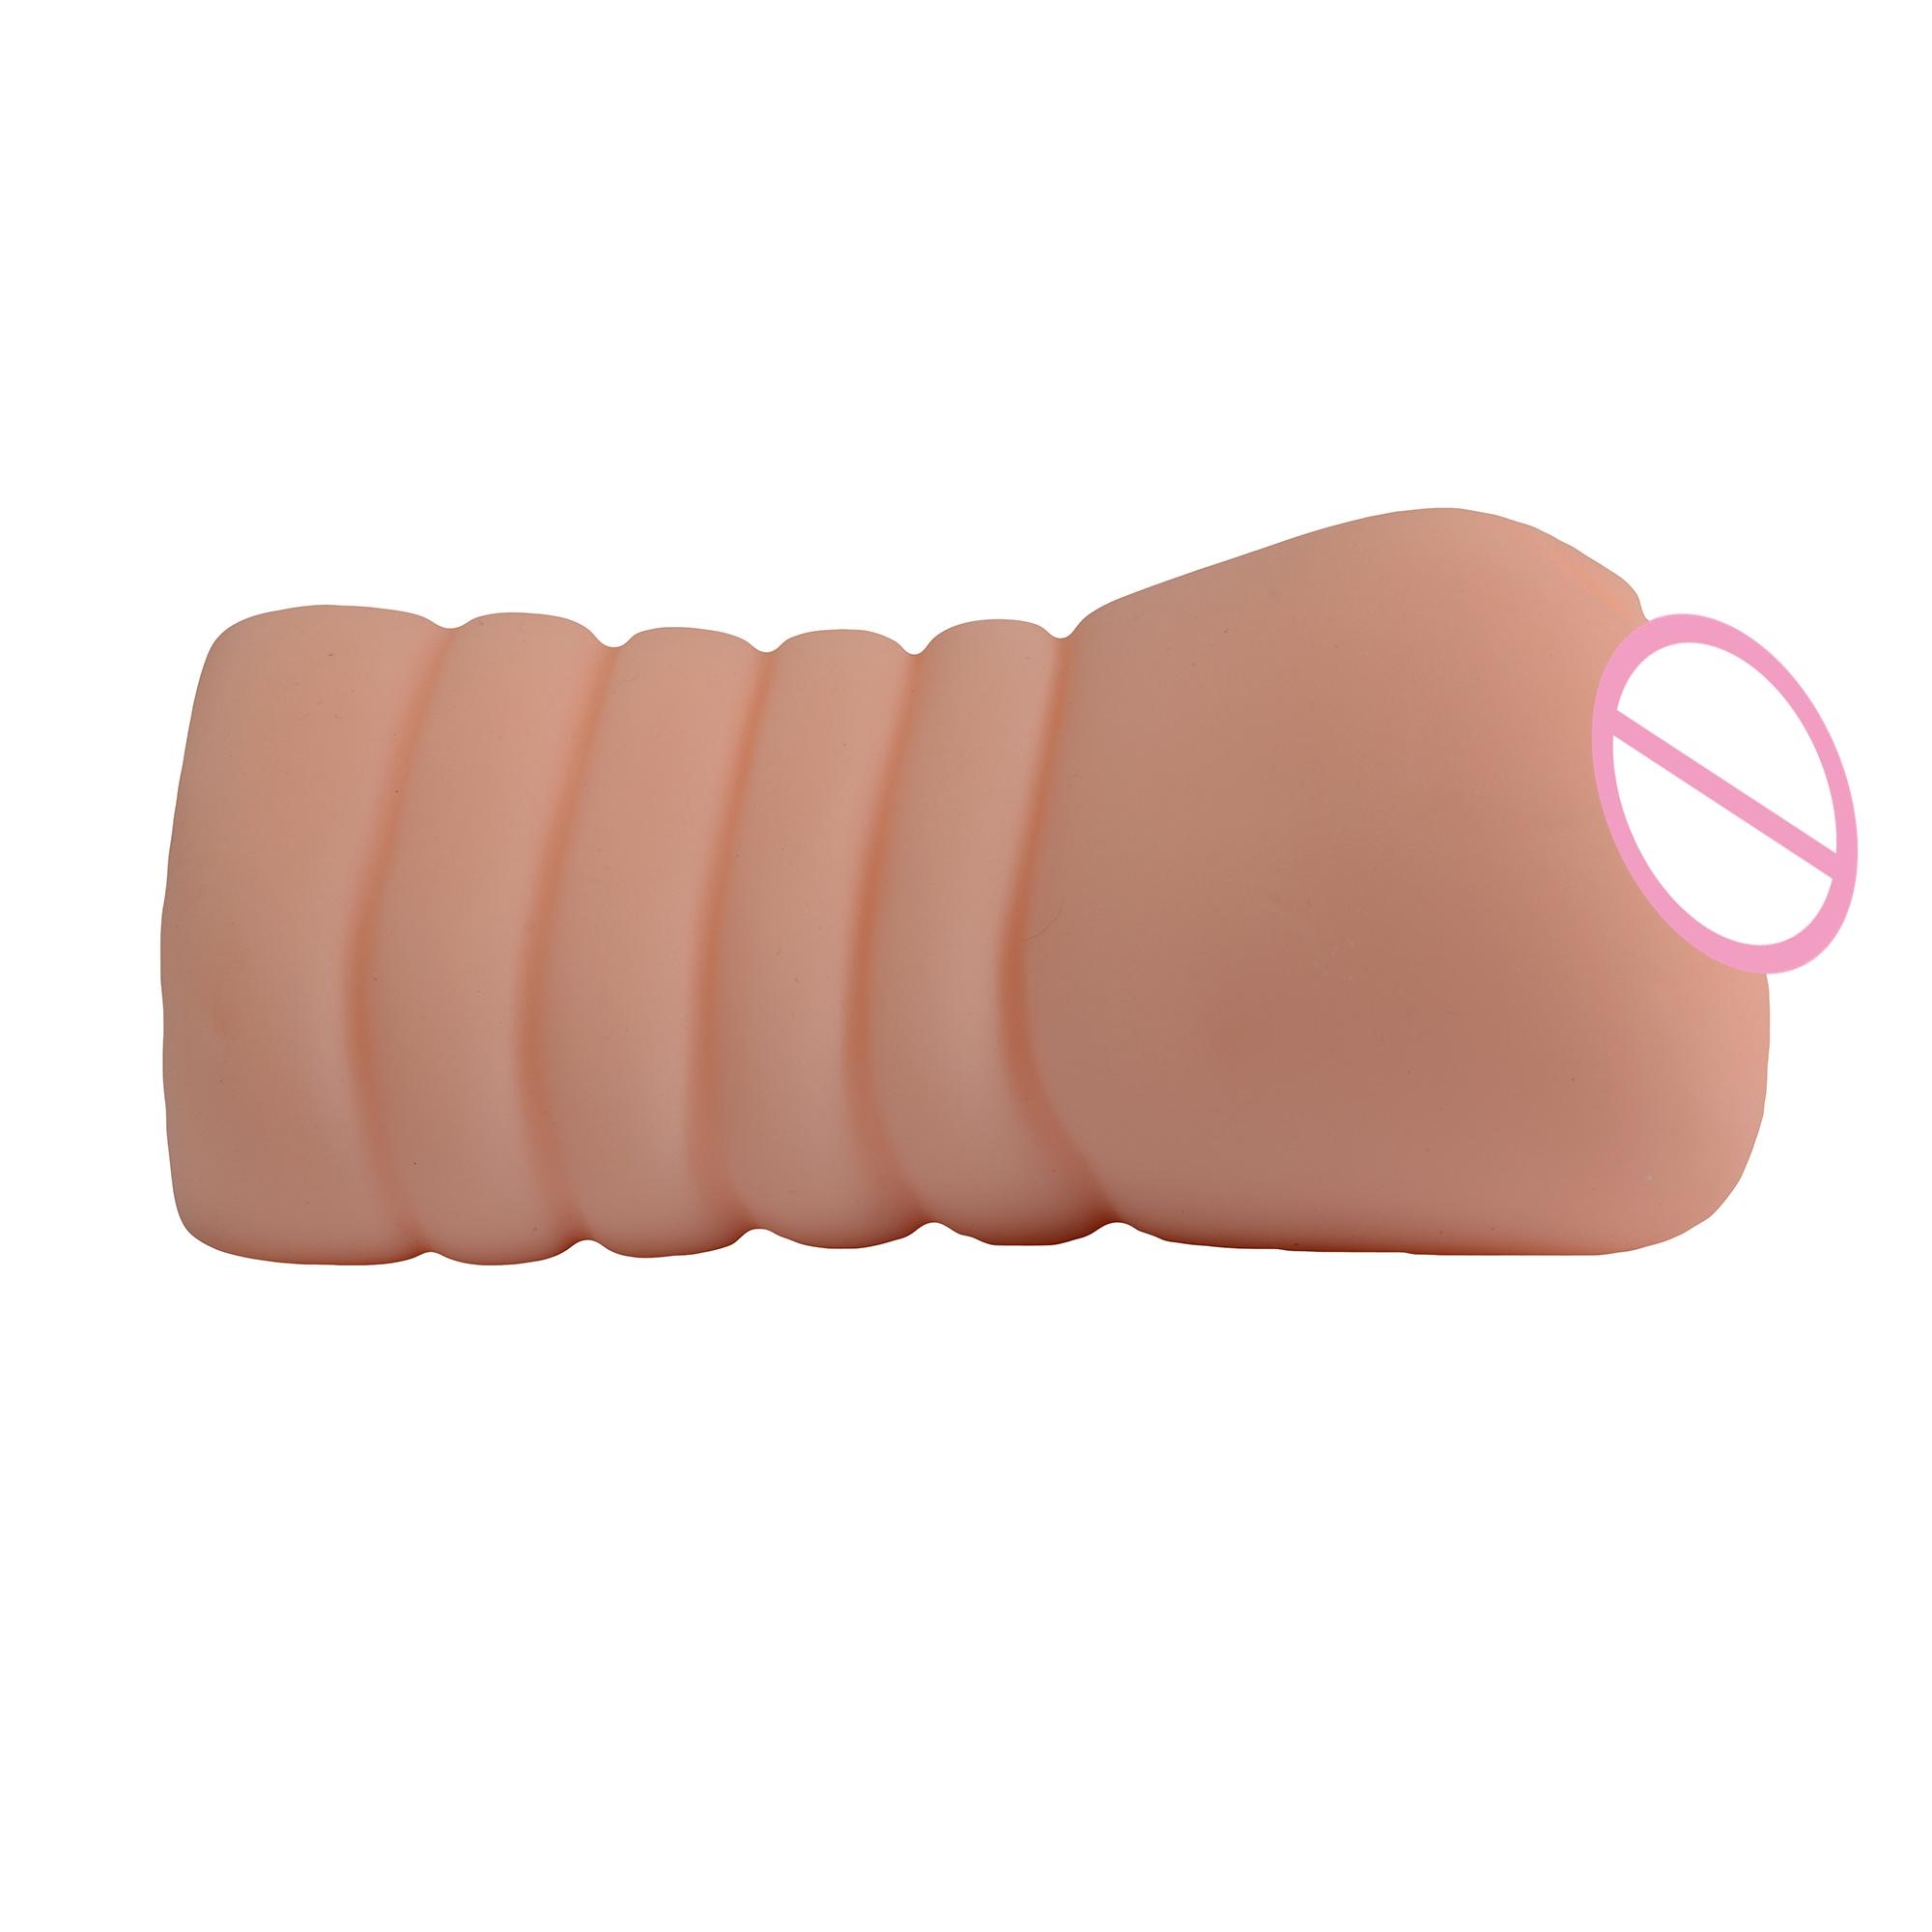  Soft Medical Dual Layer Mini Vaginal Masturbation Stroker Realistic Portable Sex Huge Big Ass Tight Anus Sex Toy For Male